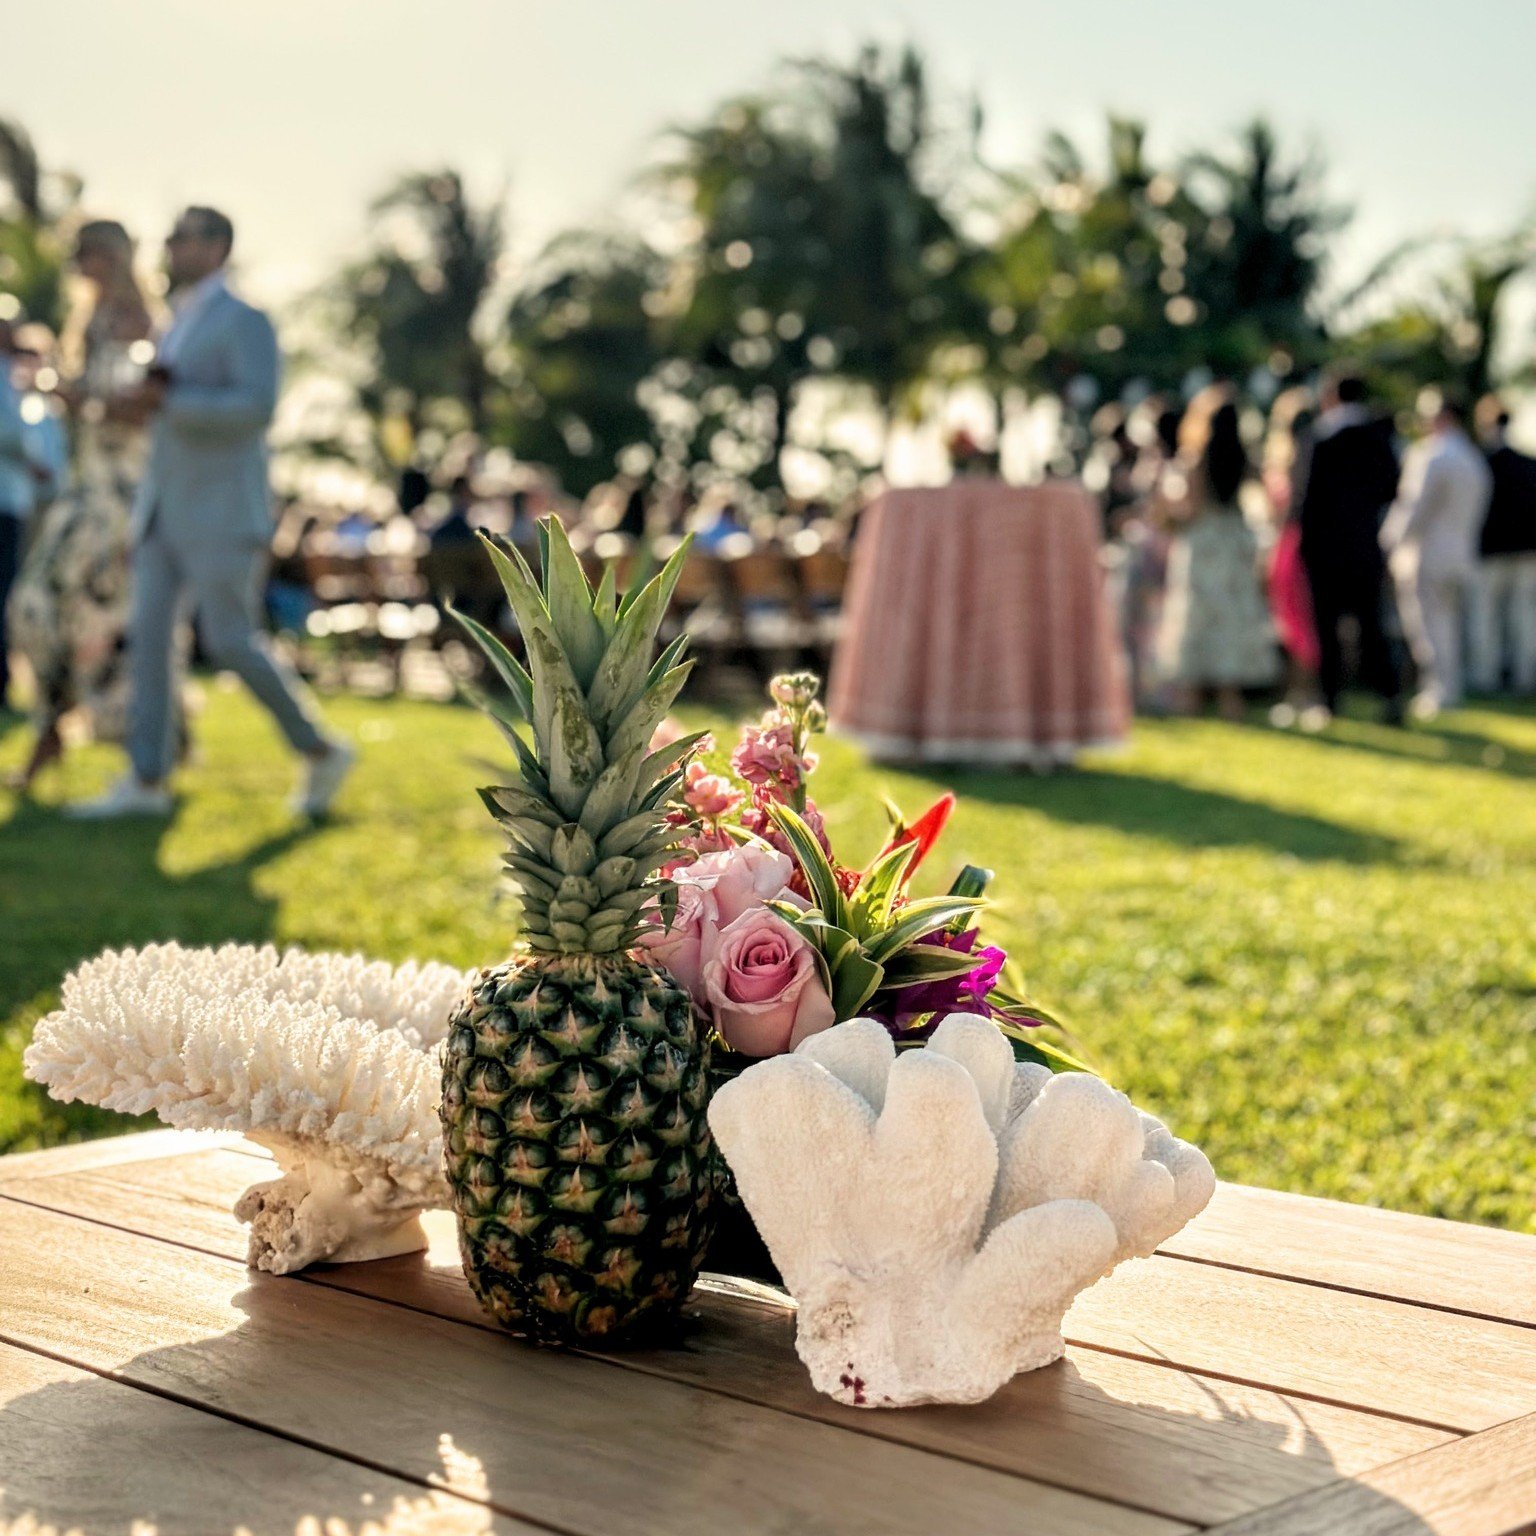 Bahamas Wedding Tip #6 : When In The Bahamas...☀️🦜

Embrace the tropical beauty of The Bahamas with your wedding decor and theme. Think lush greenery, seashells, and vibrant local blooms to create an unforgettable  atmosphere.
.
.
.
.
.
.
.
.
#weddi